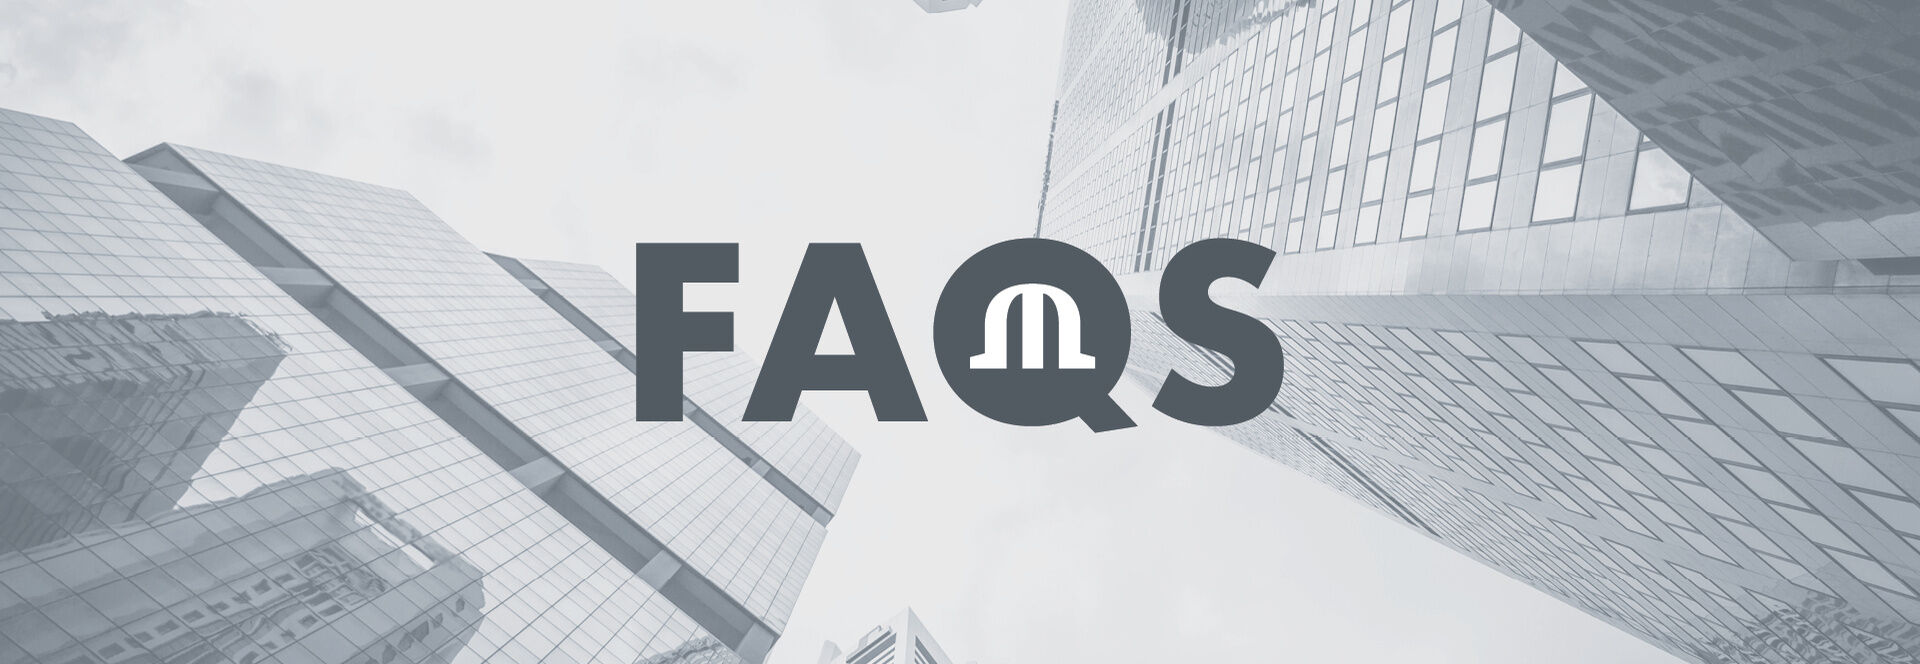 Services - FAQs